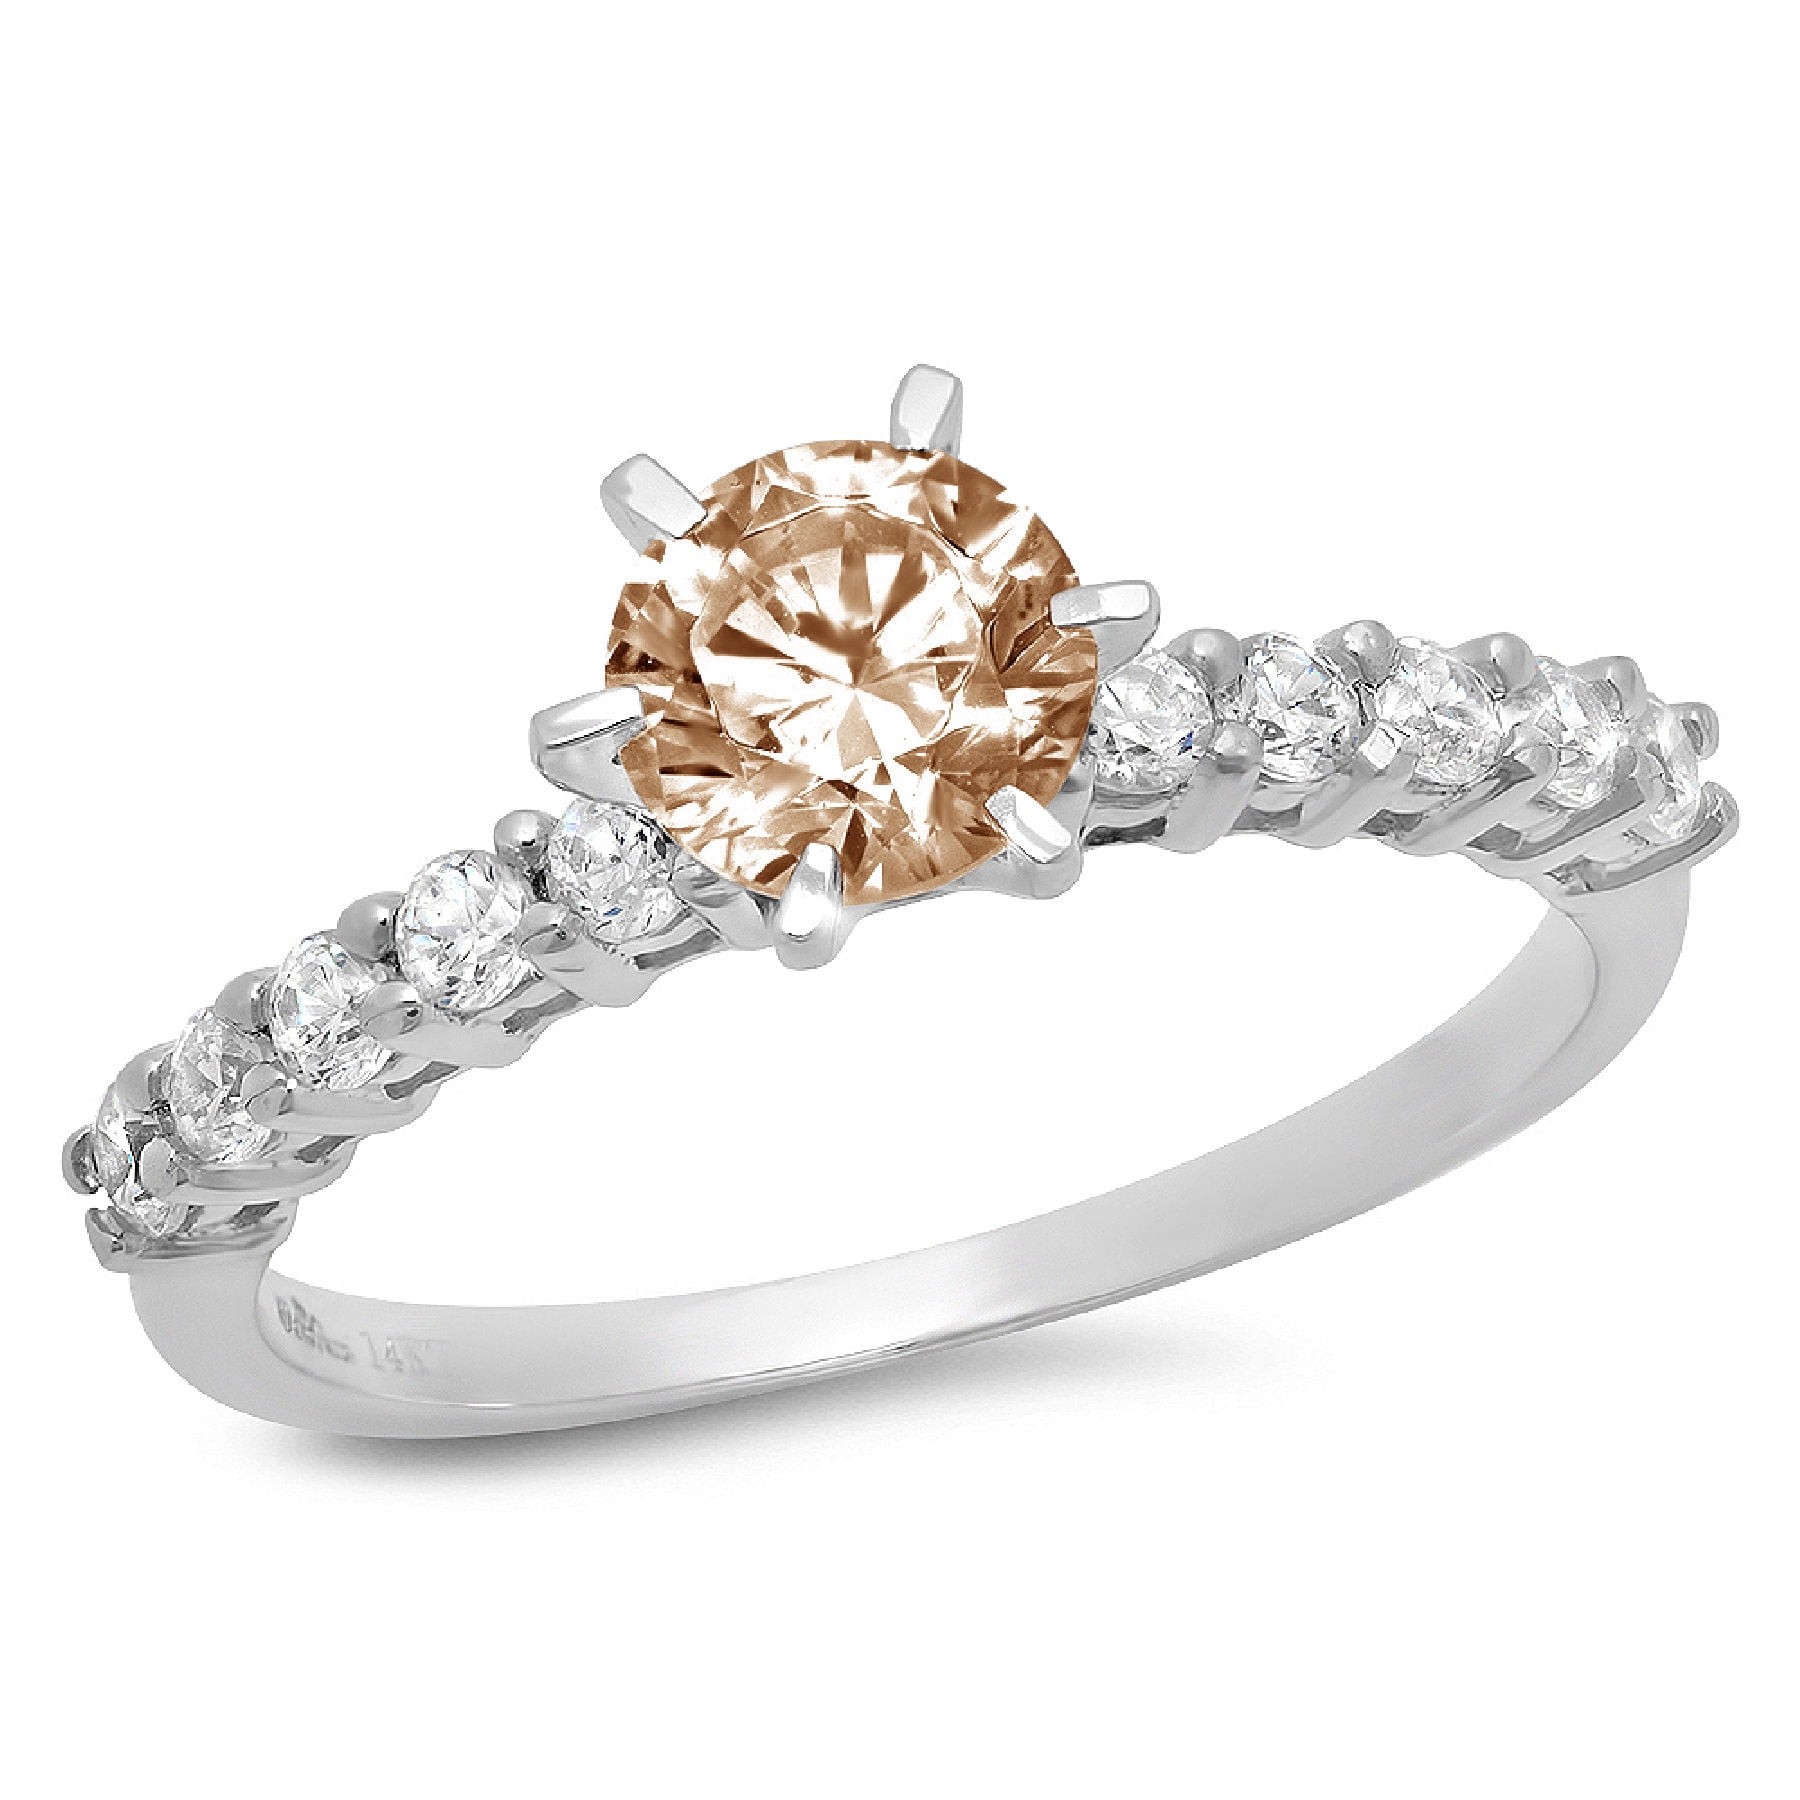 Details about   1.50 CT Round Cut Solitaire VVS1 Diamond Enhancer Band Ring 14K White Gold Over